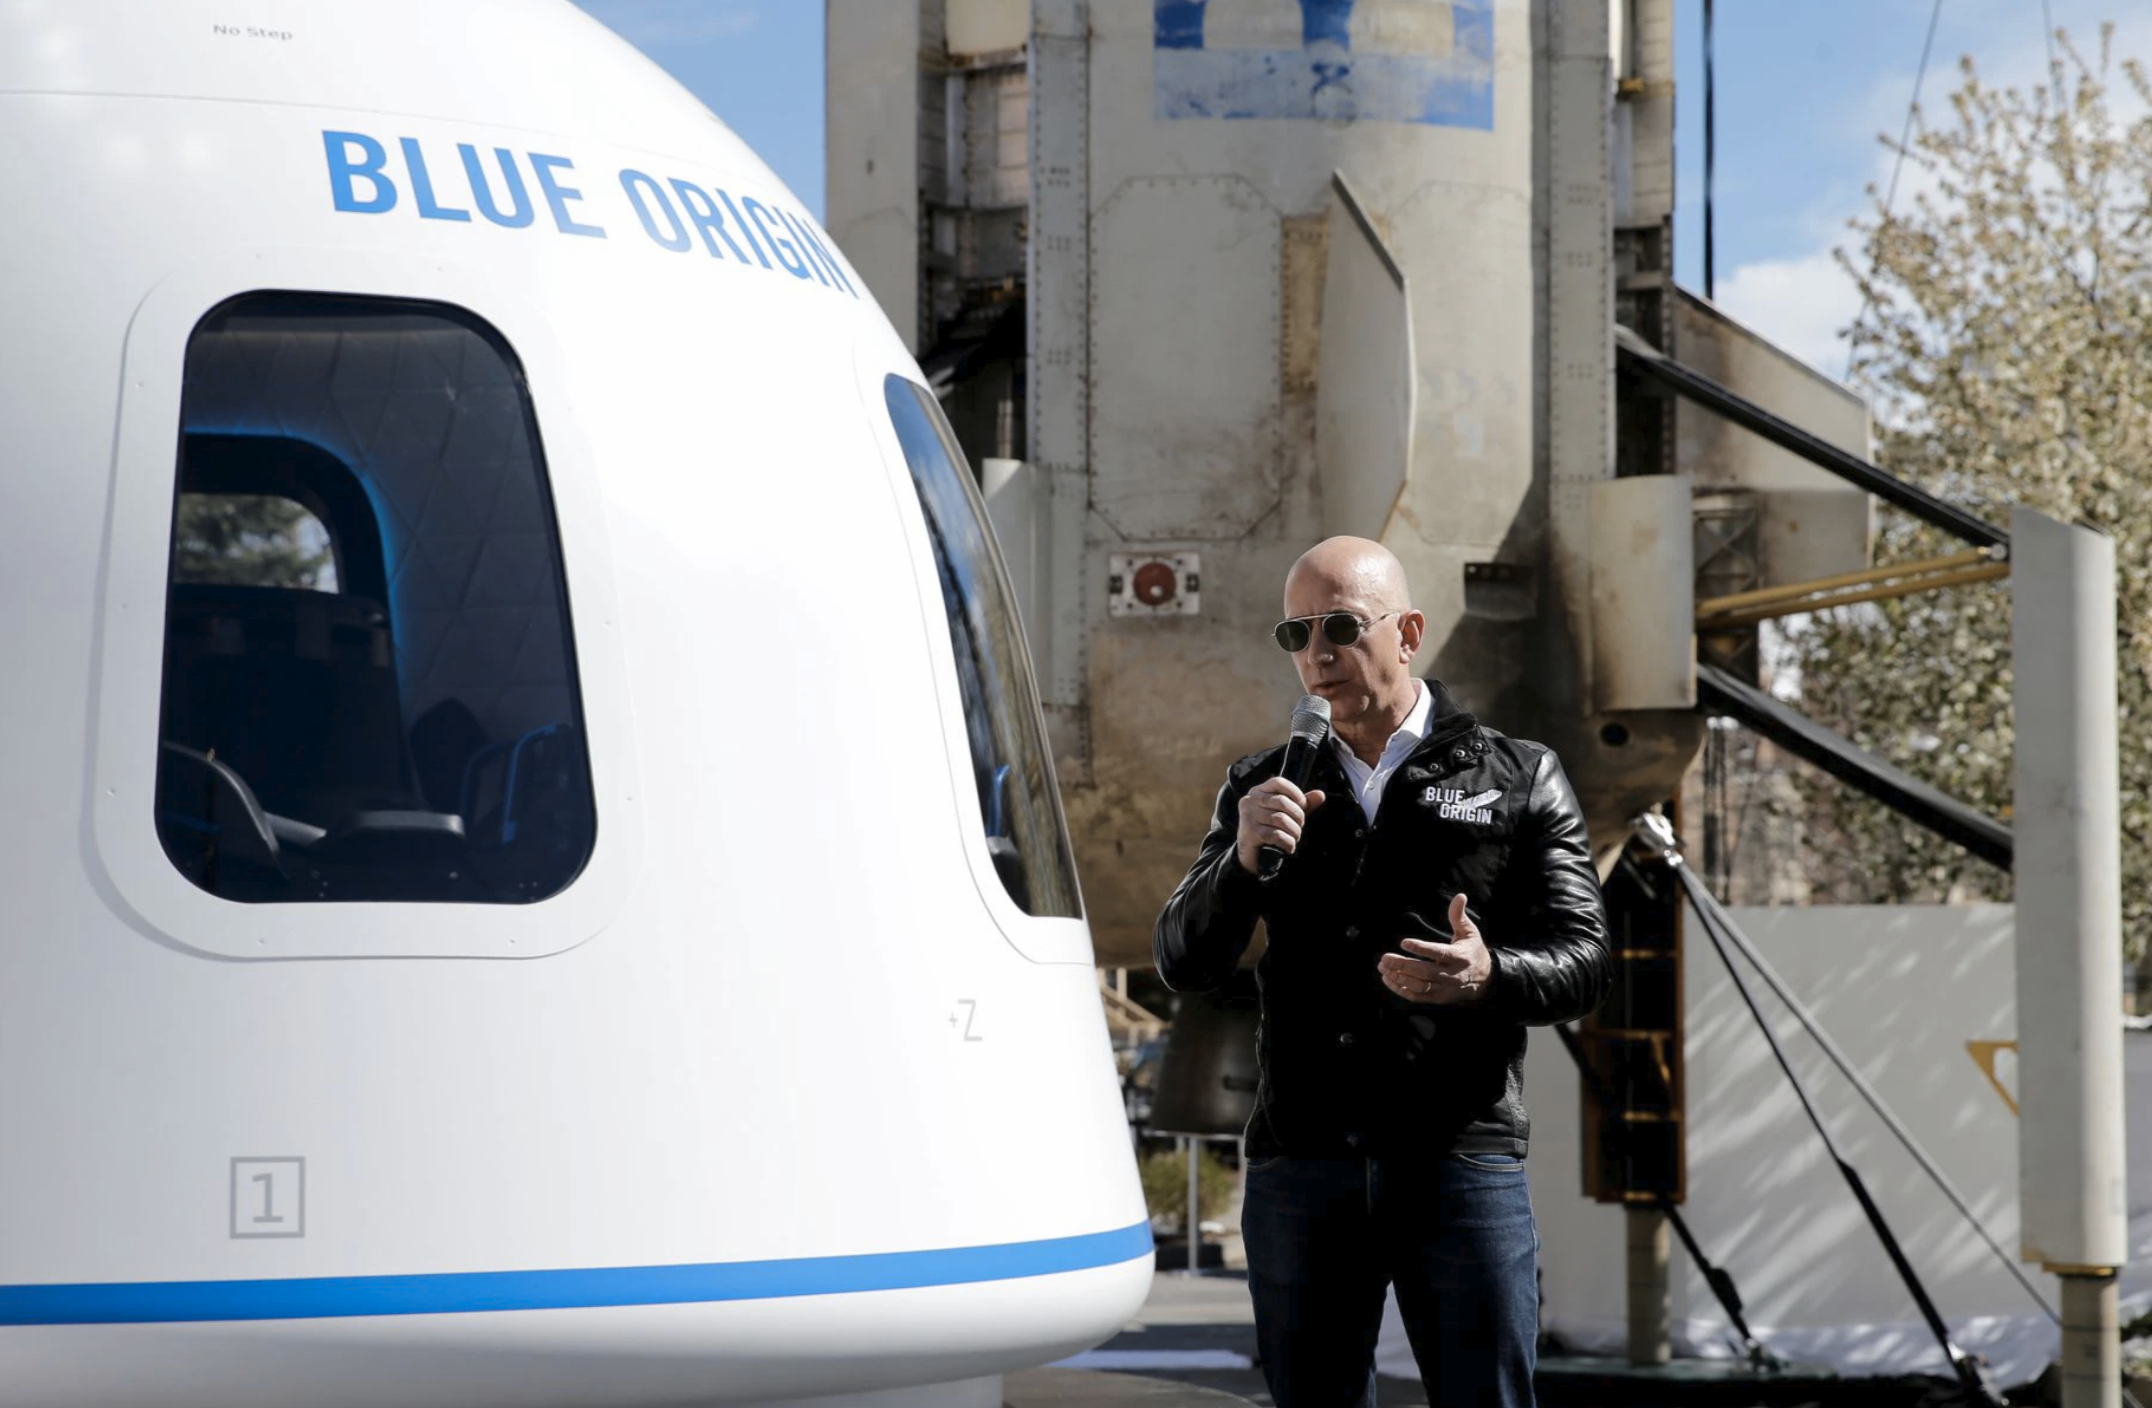 Trip to space with Jeff Bezos sells for 28 million dollars